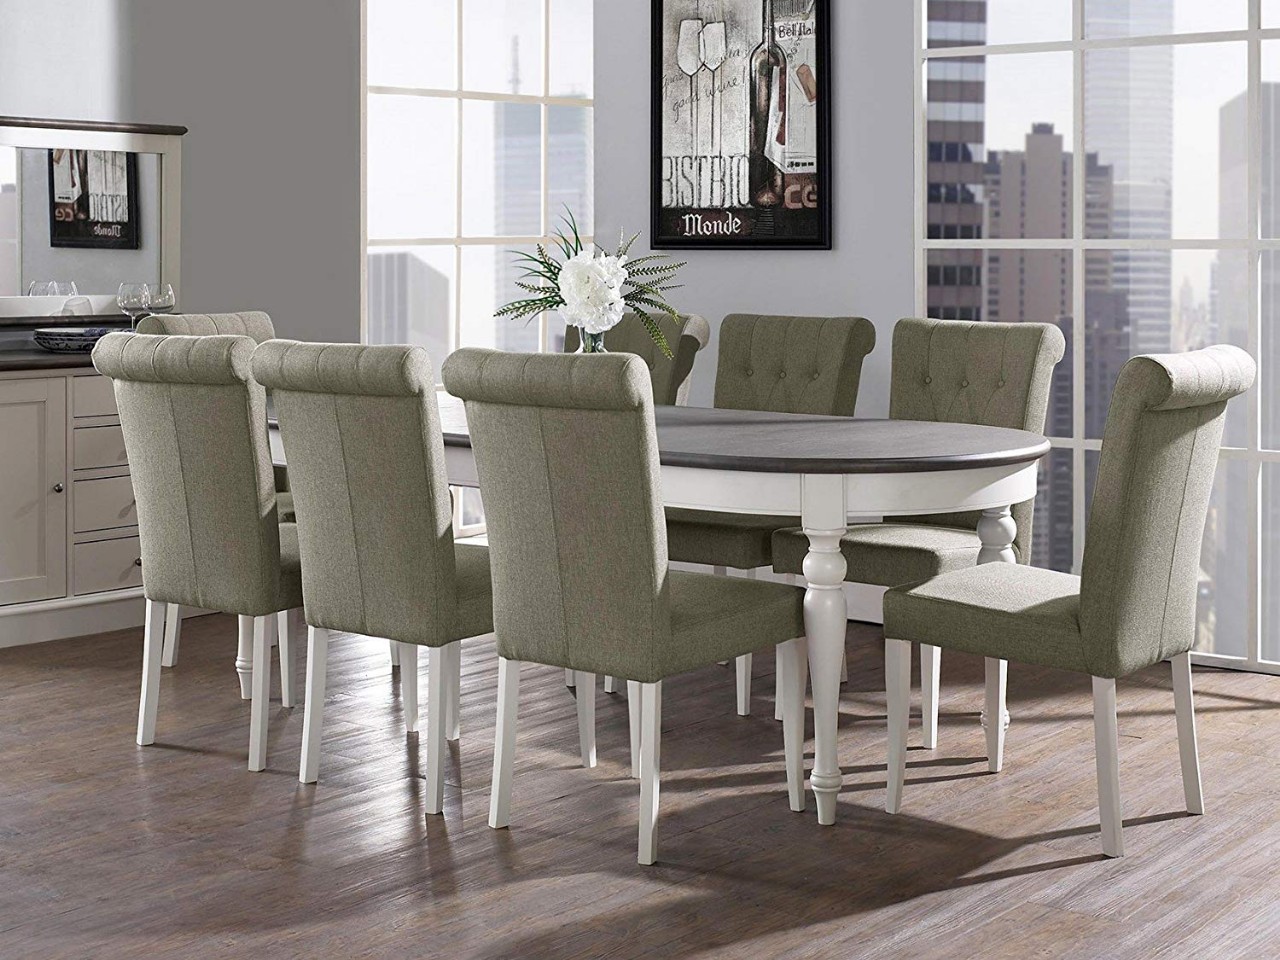 Vegas 5 Piece Round to Oval Extension Dining Table Set for 4 Oval Back Chairs